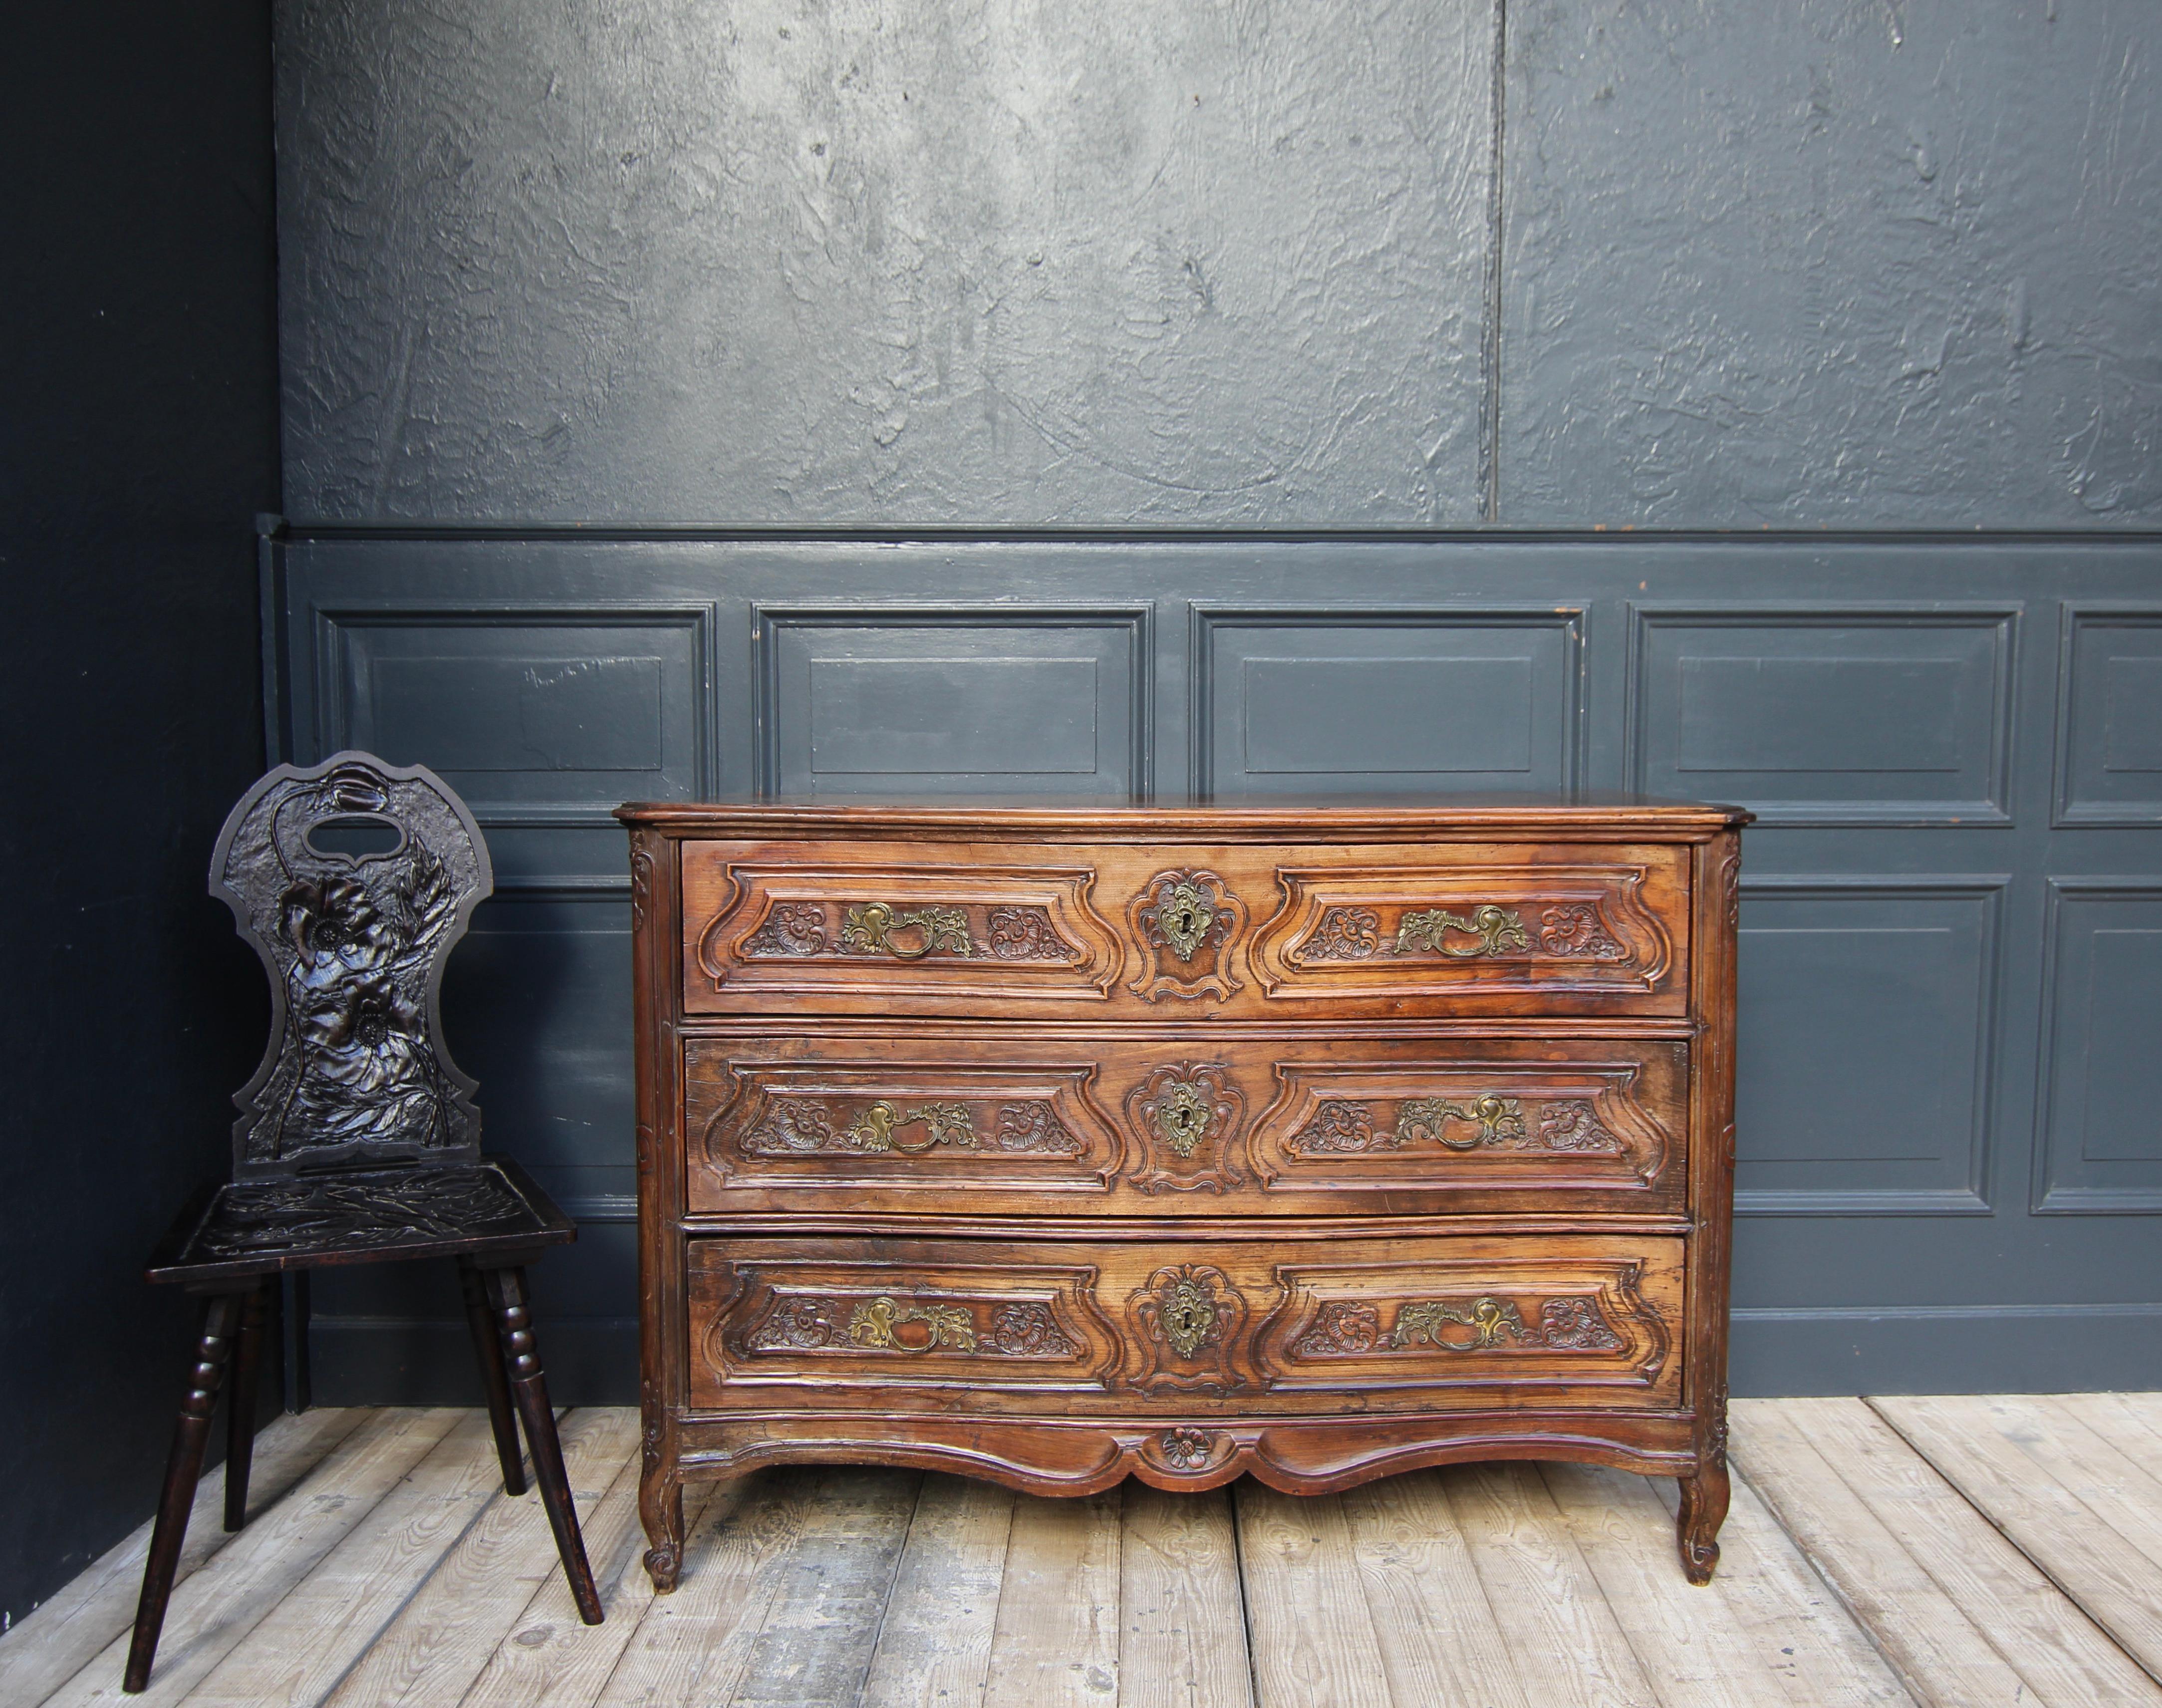 A 18th century French Louis XV chest of drawers. Solidly made of cherry wood and hand carved with floral and ornamental motifs. Restored condition.

Slightly trapezoidal lateral coffered corpus with 3 drawers and profiled top. Nobly S-shaped